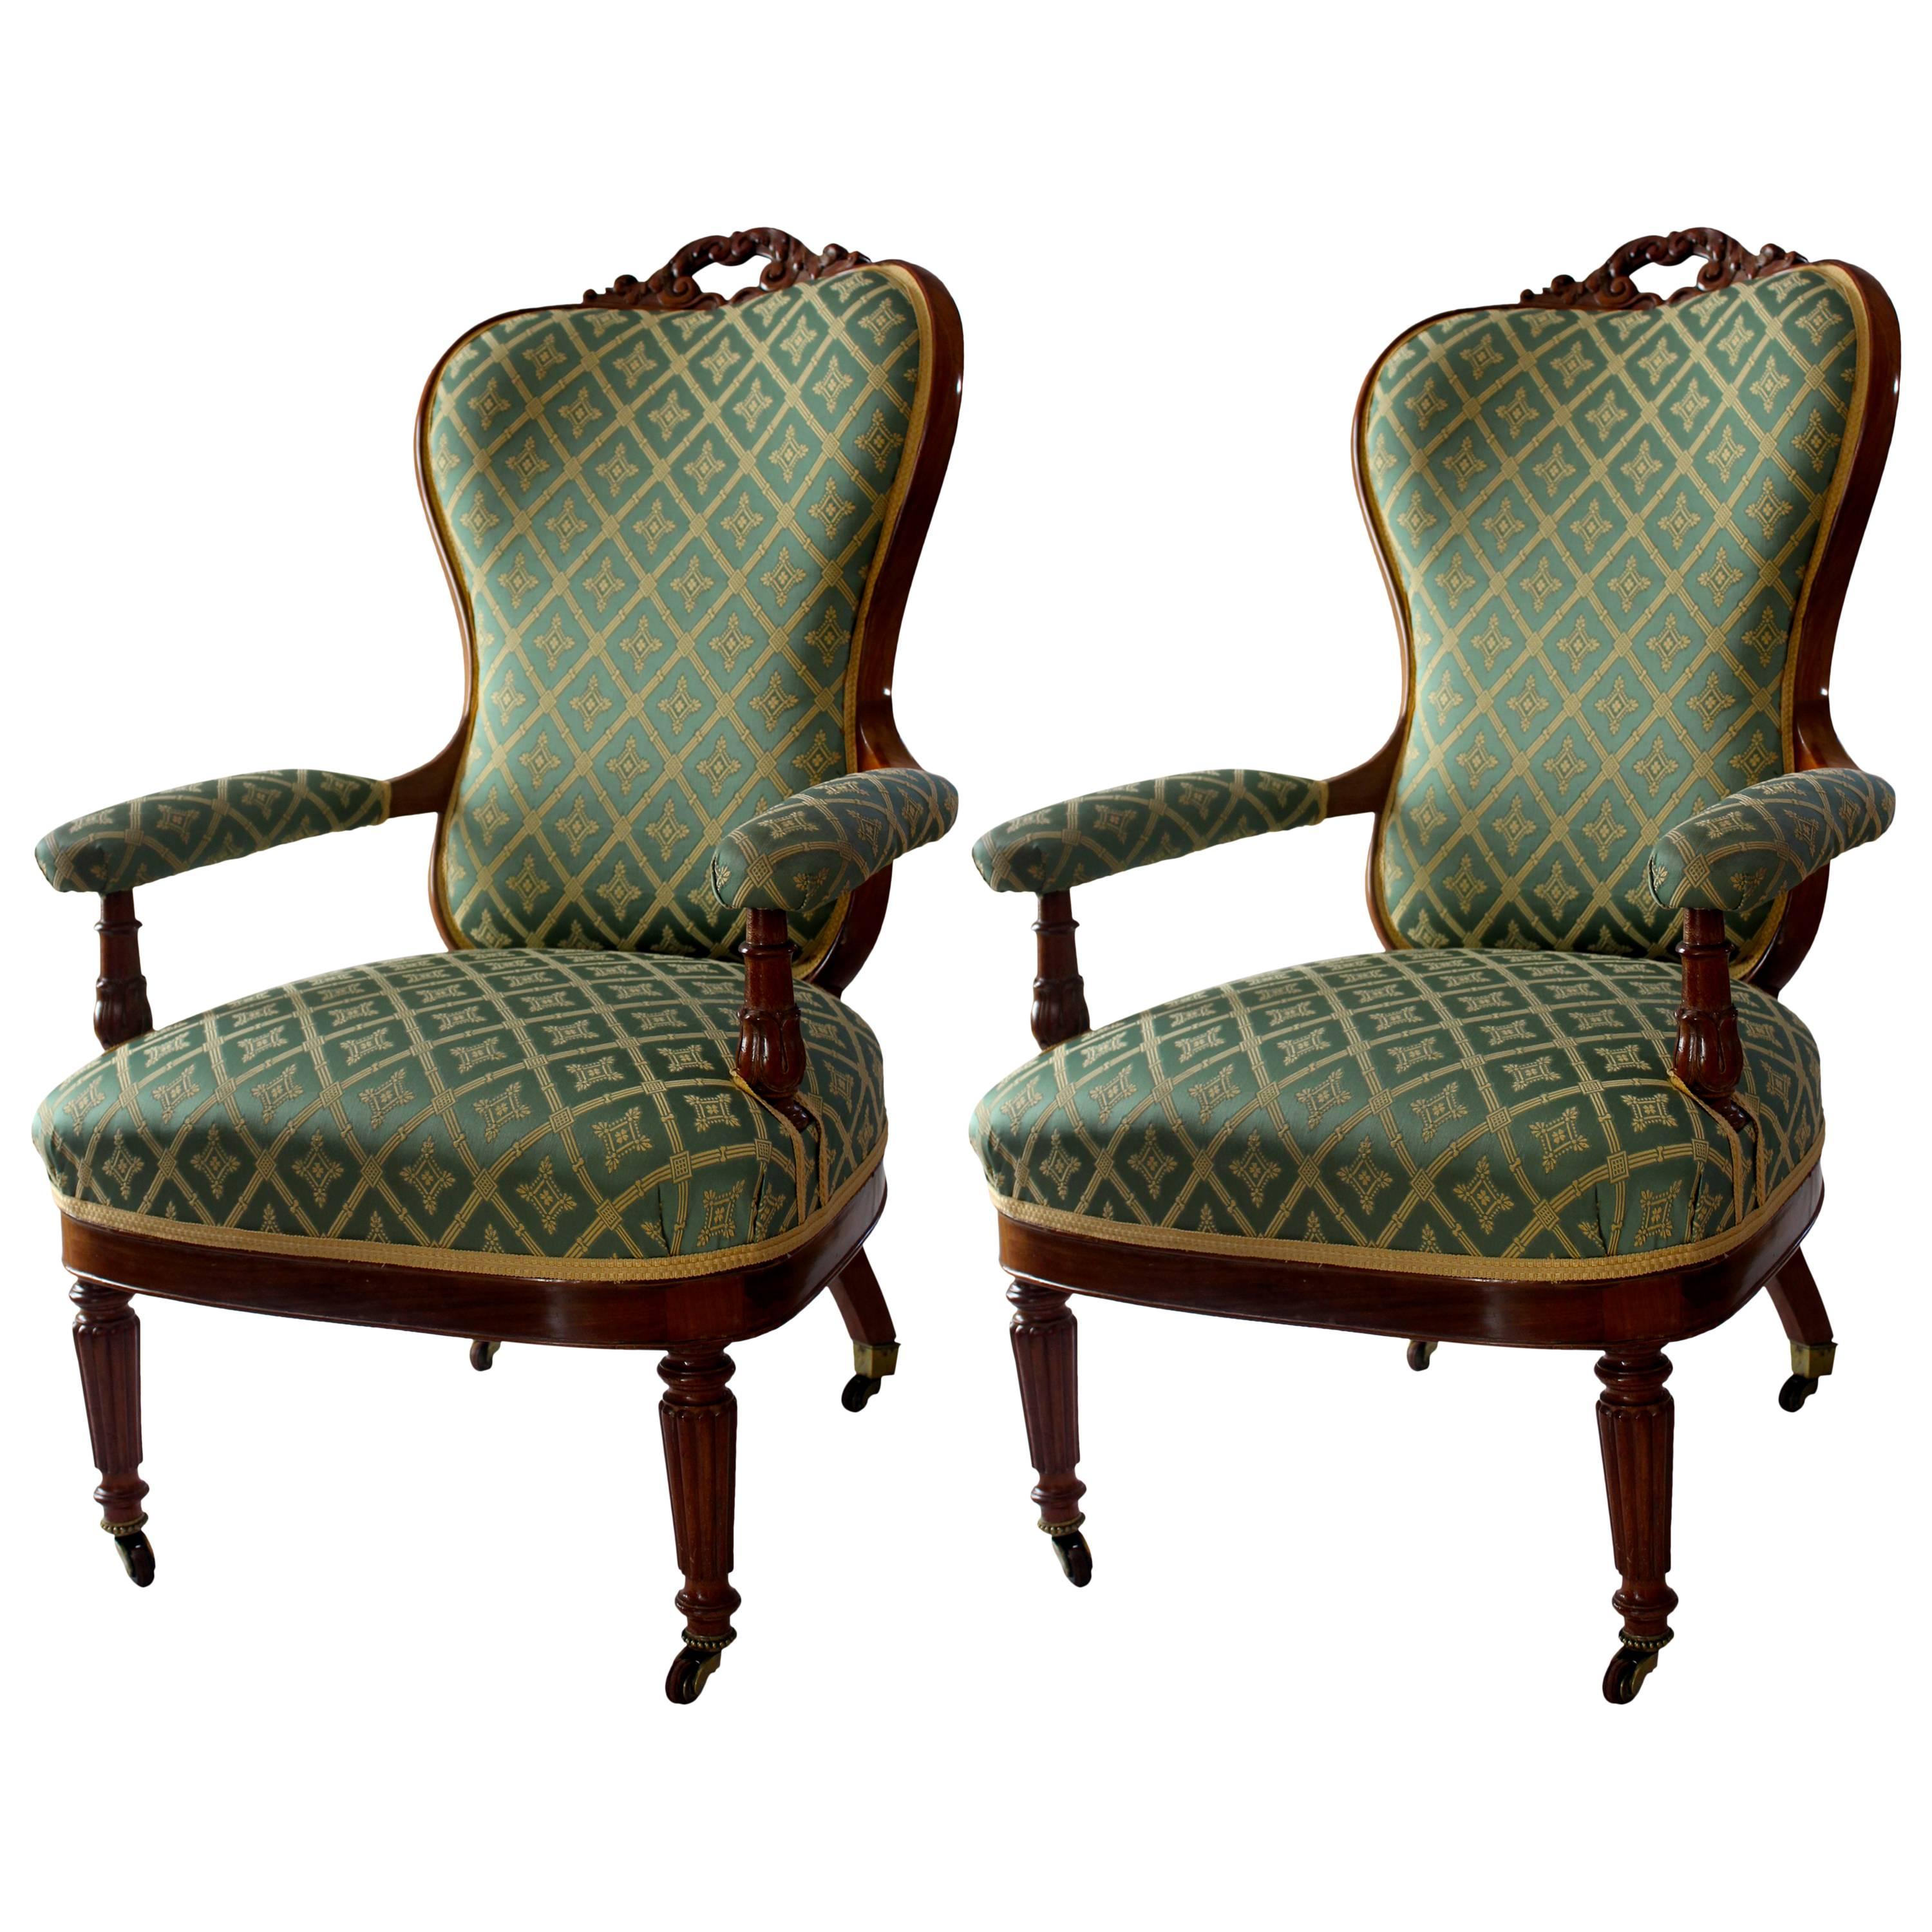 Pair of Louis-Philippe Armchairs, 19th Century